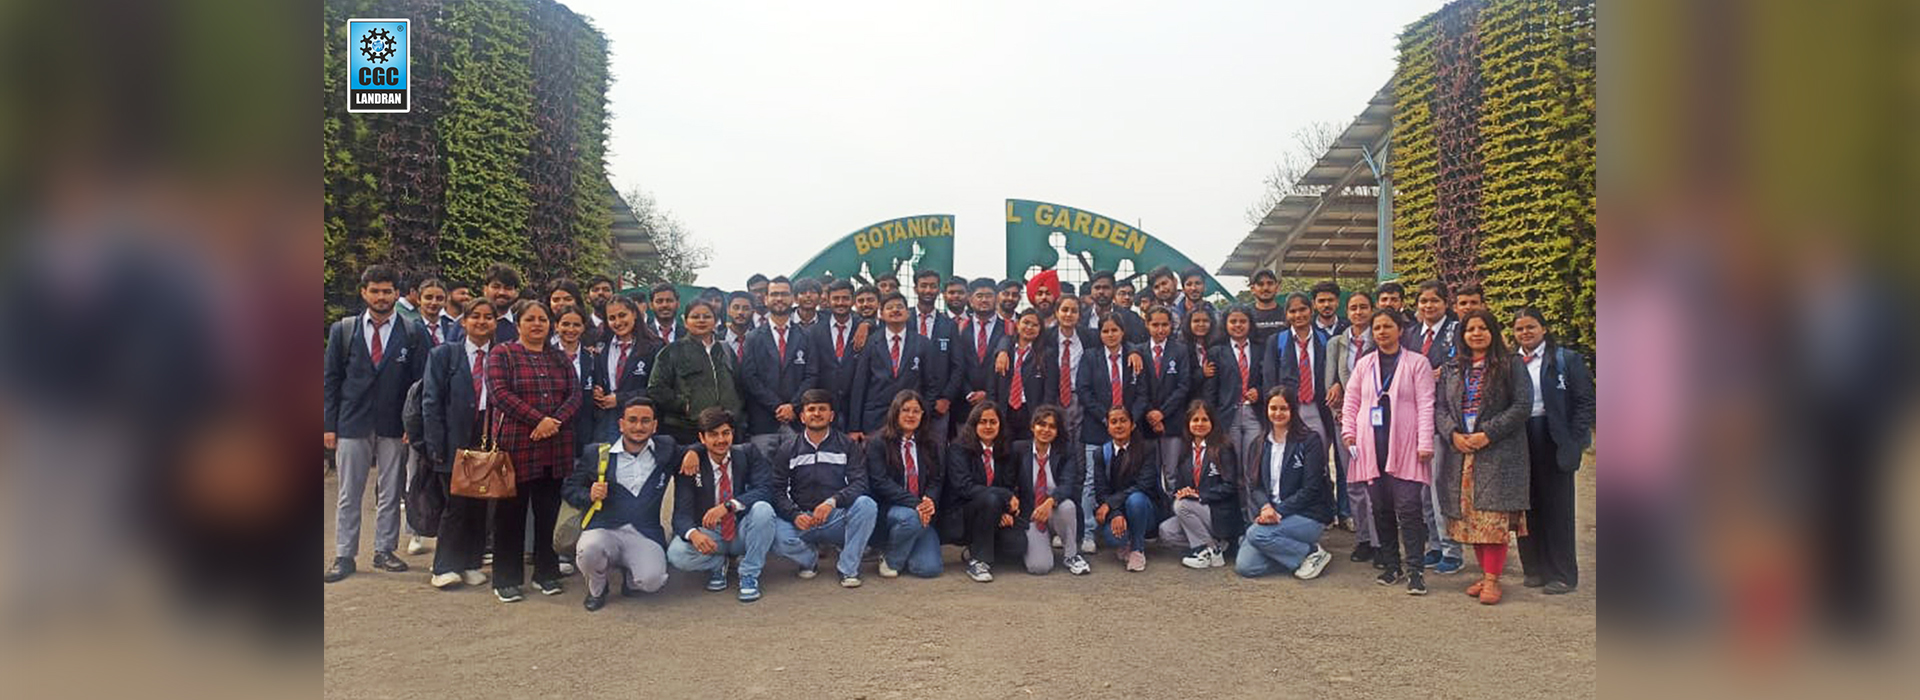 Chandigarh College of Pharmacy B. Pharm Students Immerse in Practical Learning at Botanical Garden Visit 